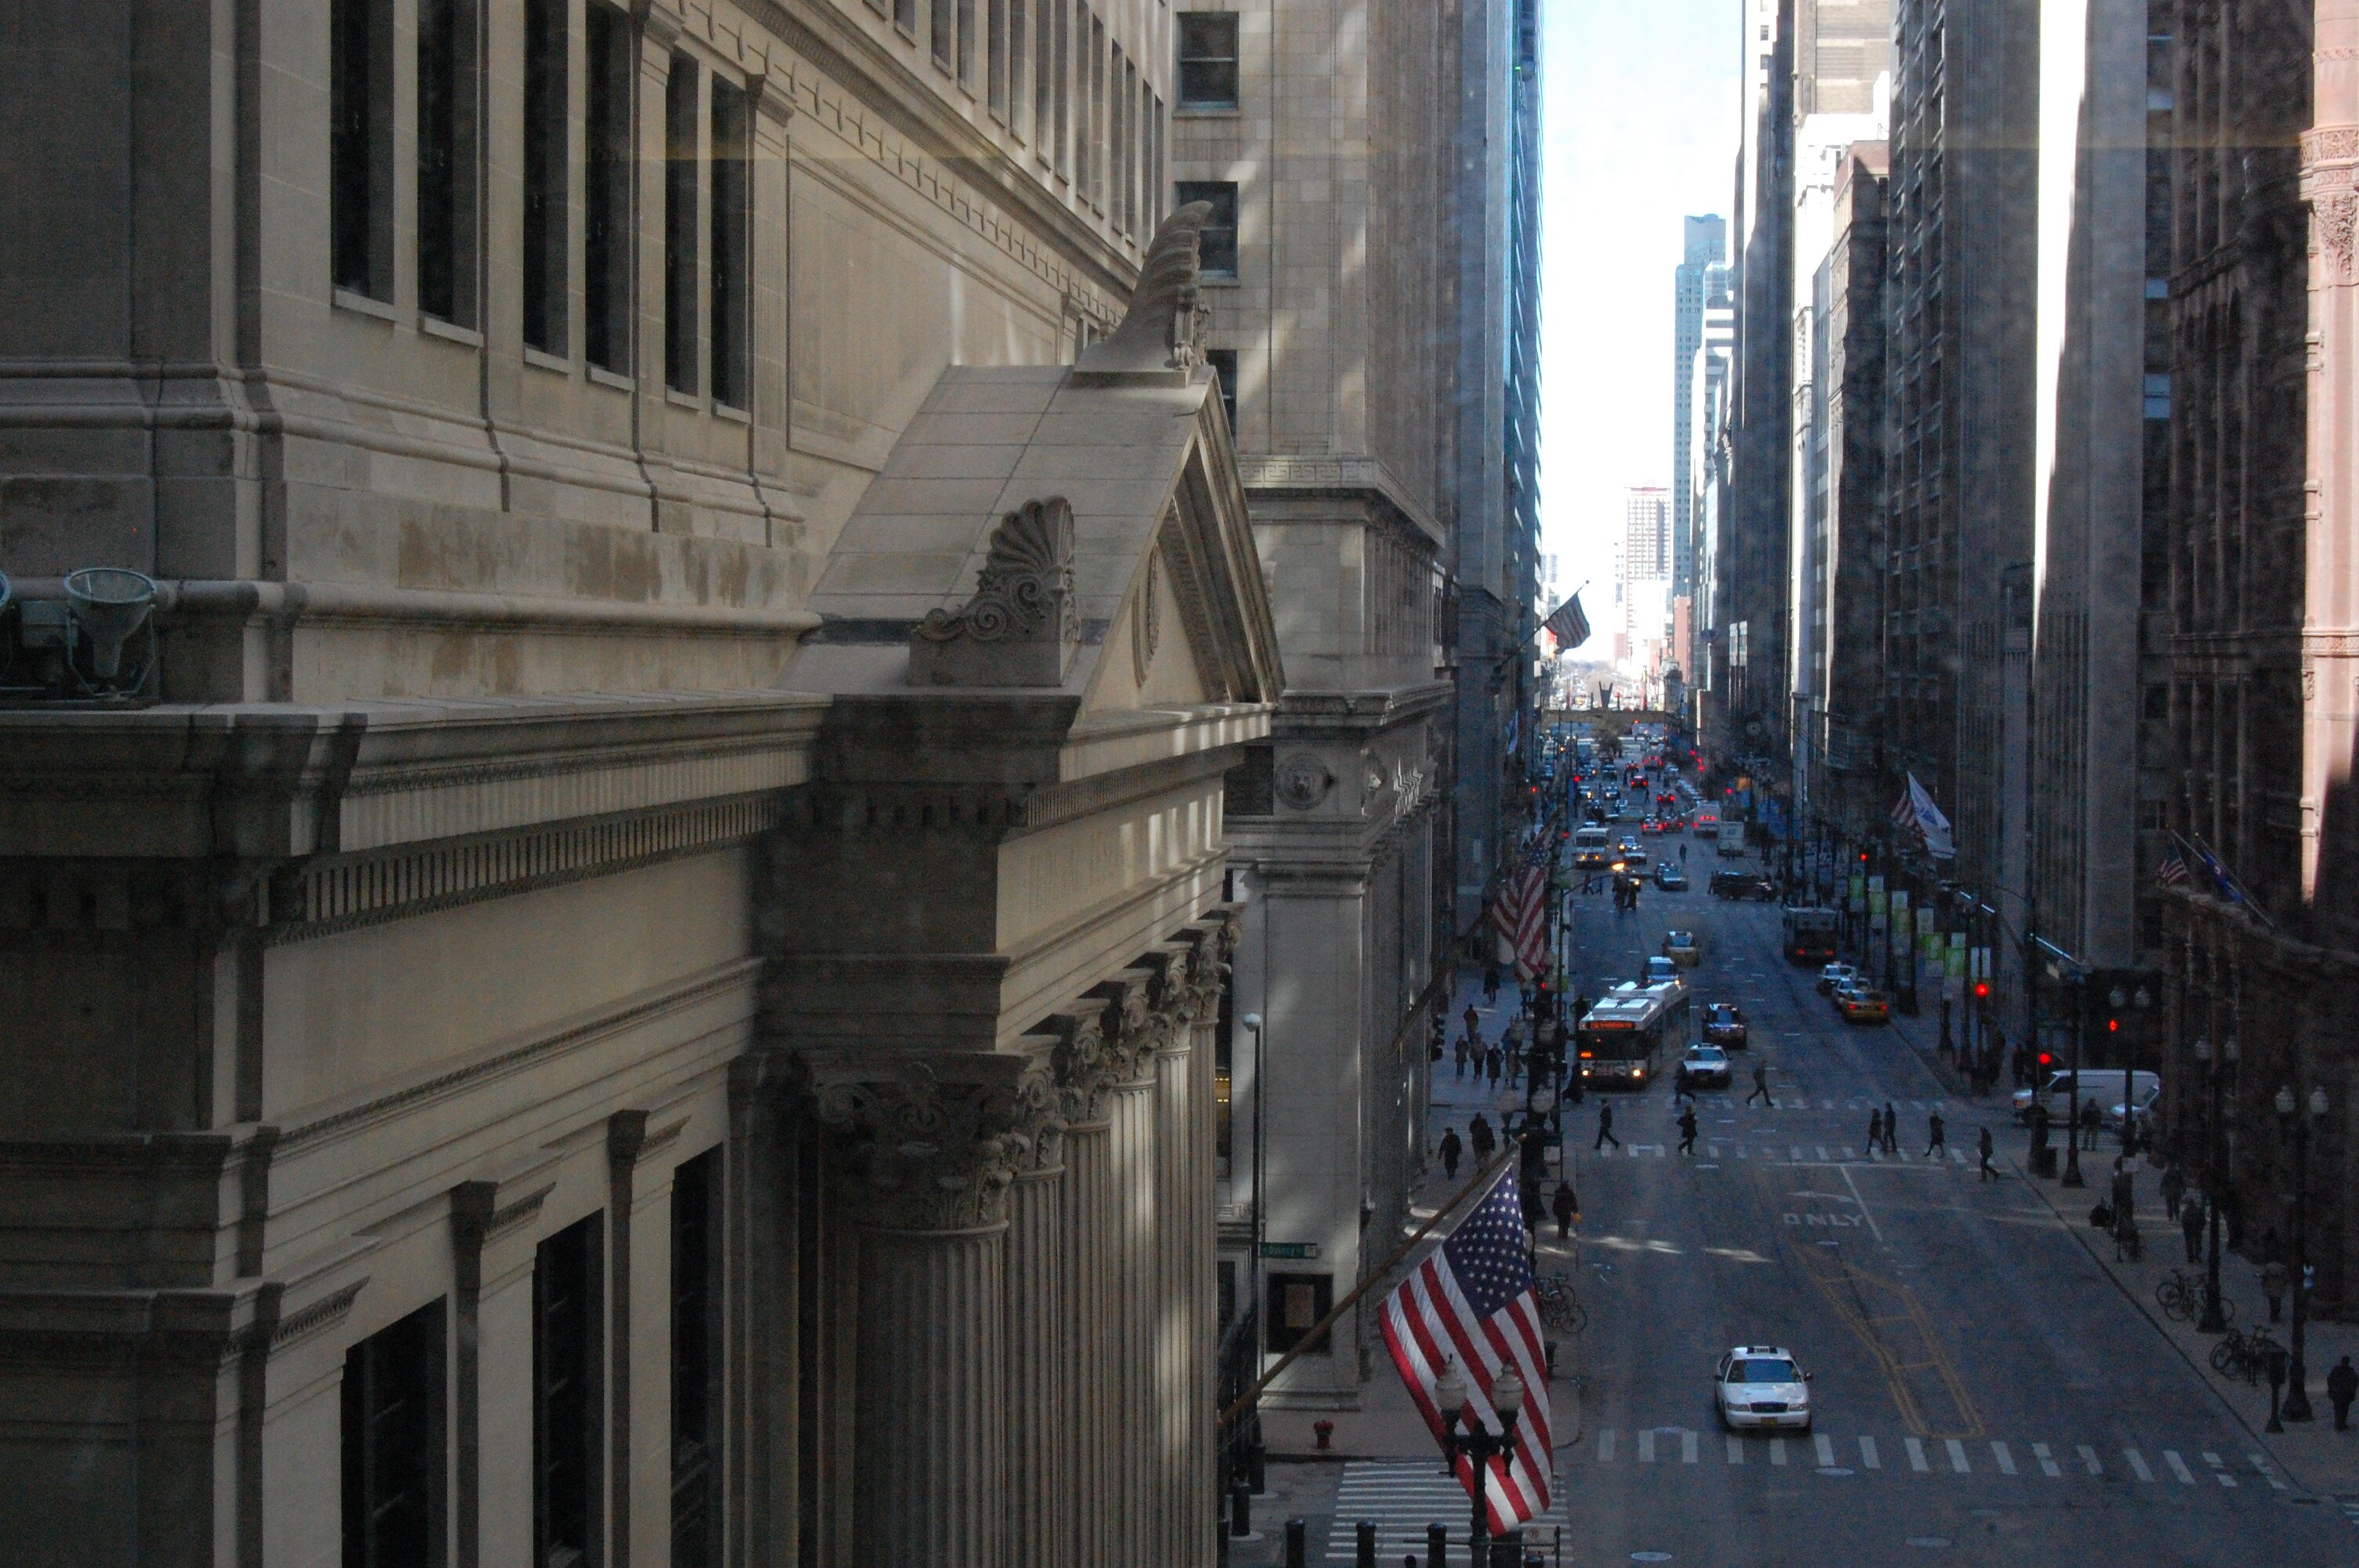 The view from our offices at the Chicago Board of Trade building. Batman was here!